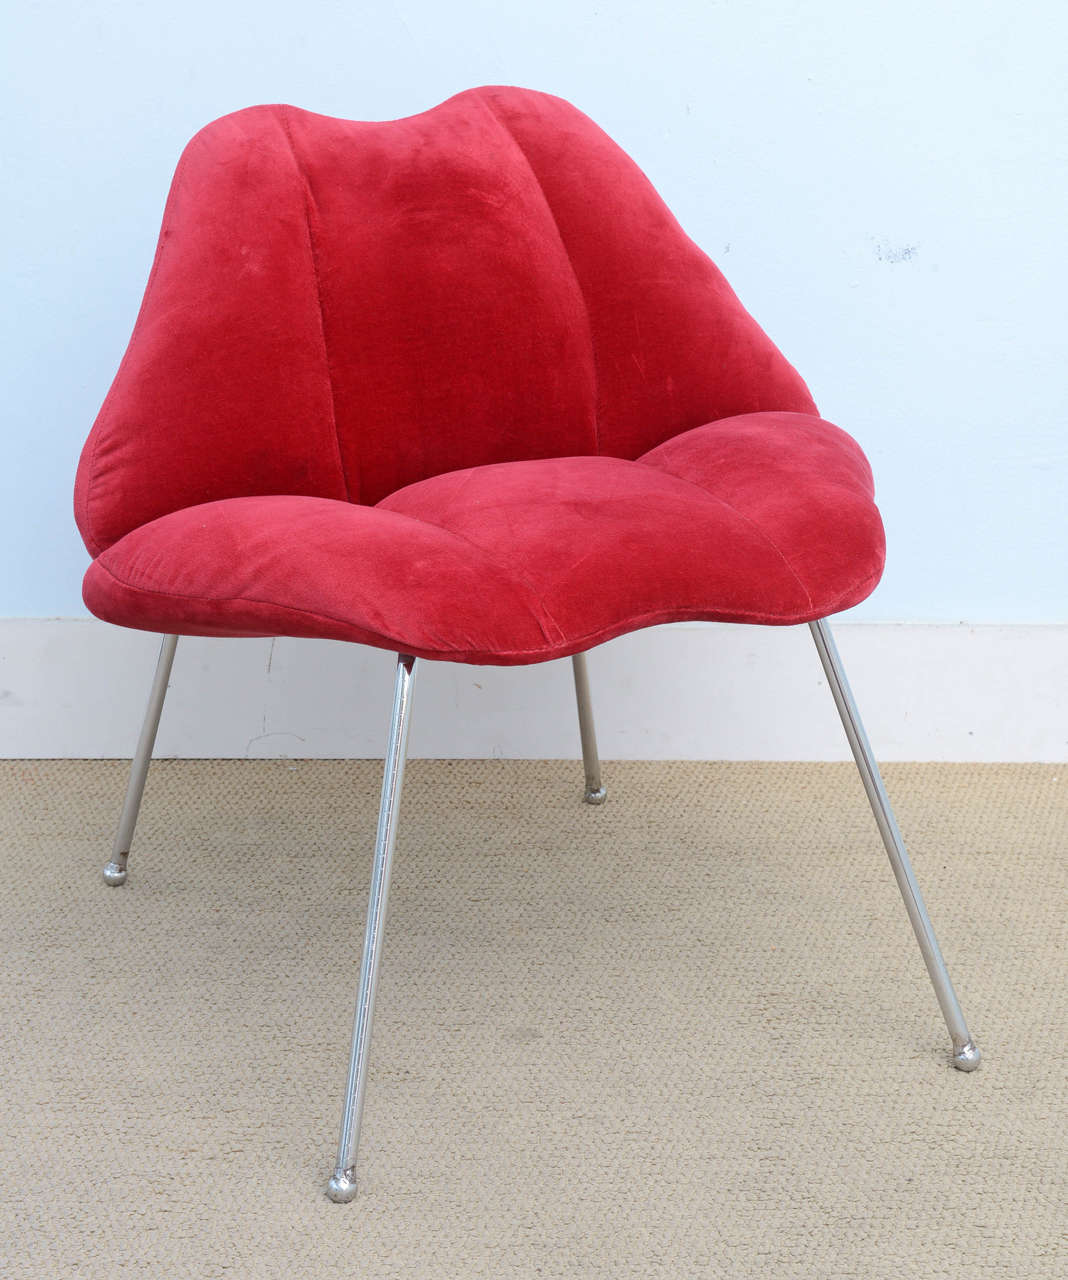 Unknown Pair of Modern Lips Pop Fun Chairs